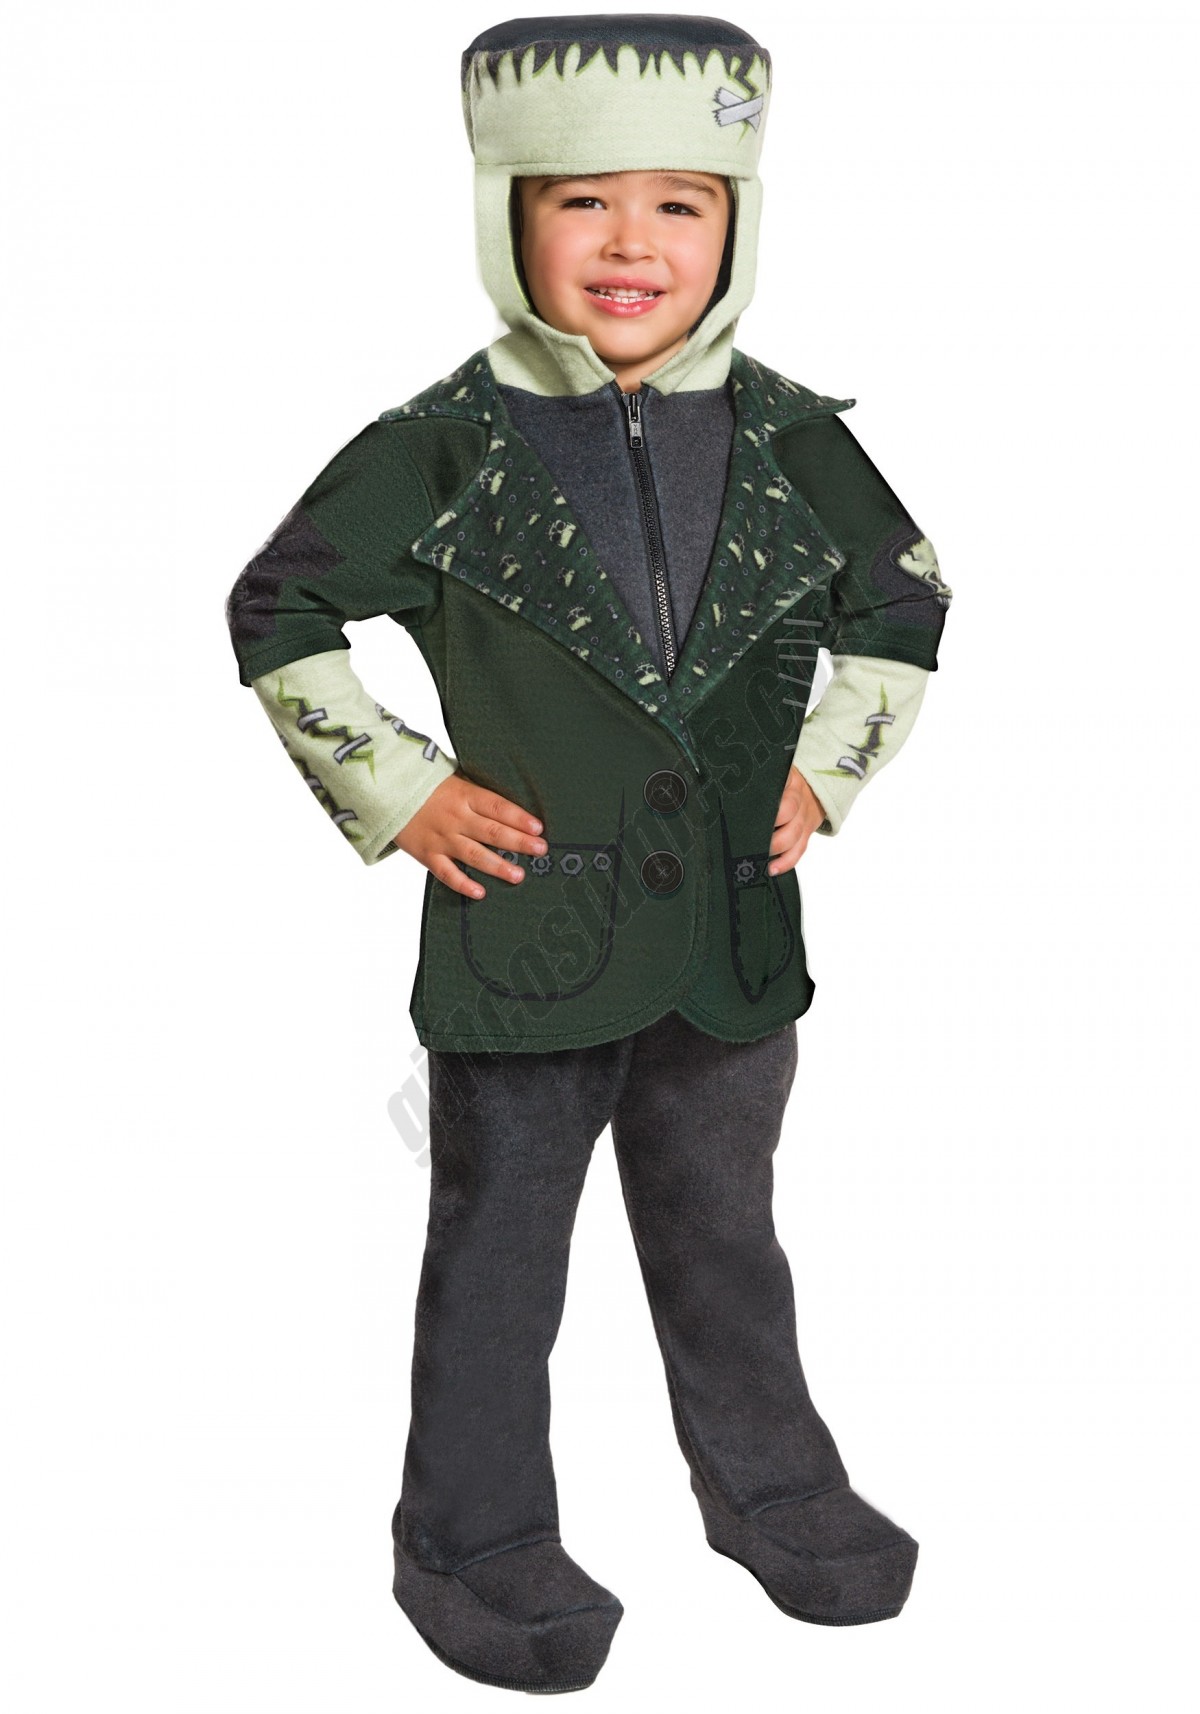 Frankenstein Costume for Toddlers Promotions - -0